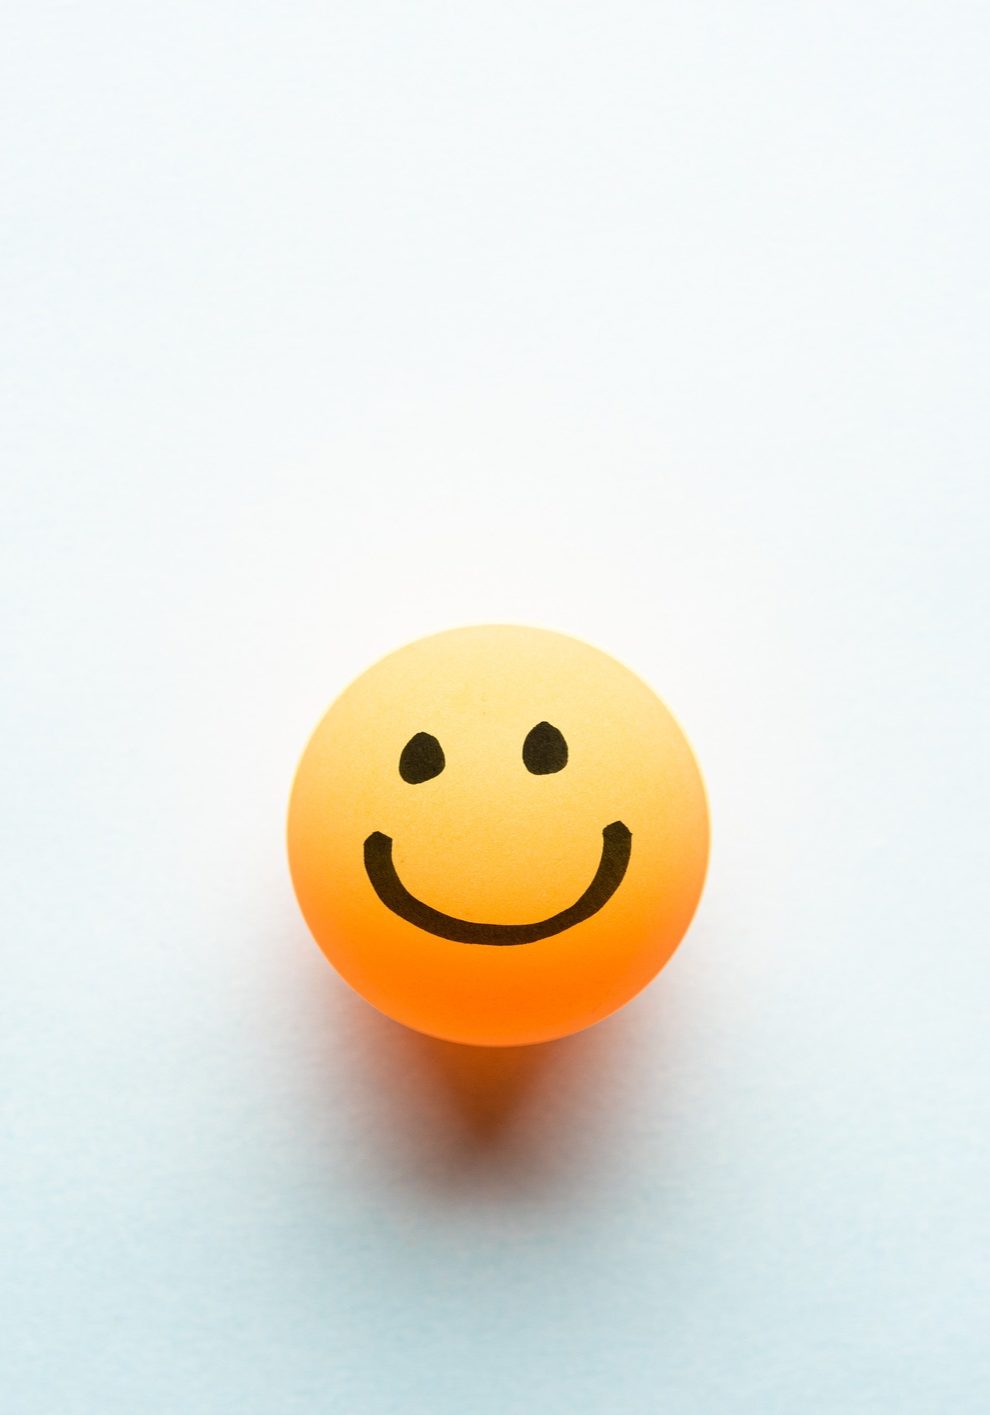 Happy smiley emoticon on a yellow ping pong ball with space for text blue background